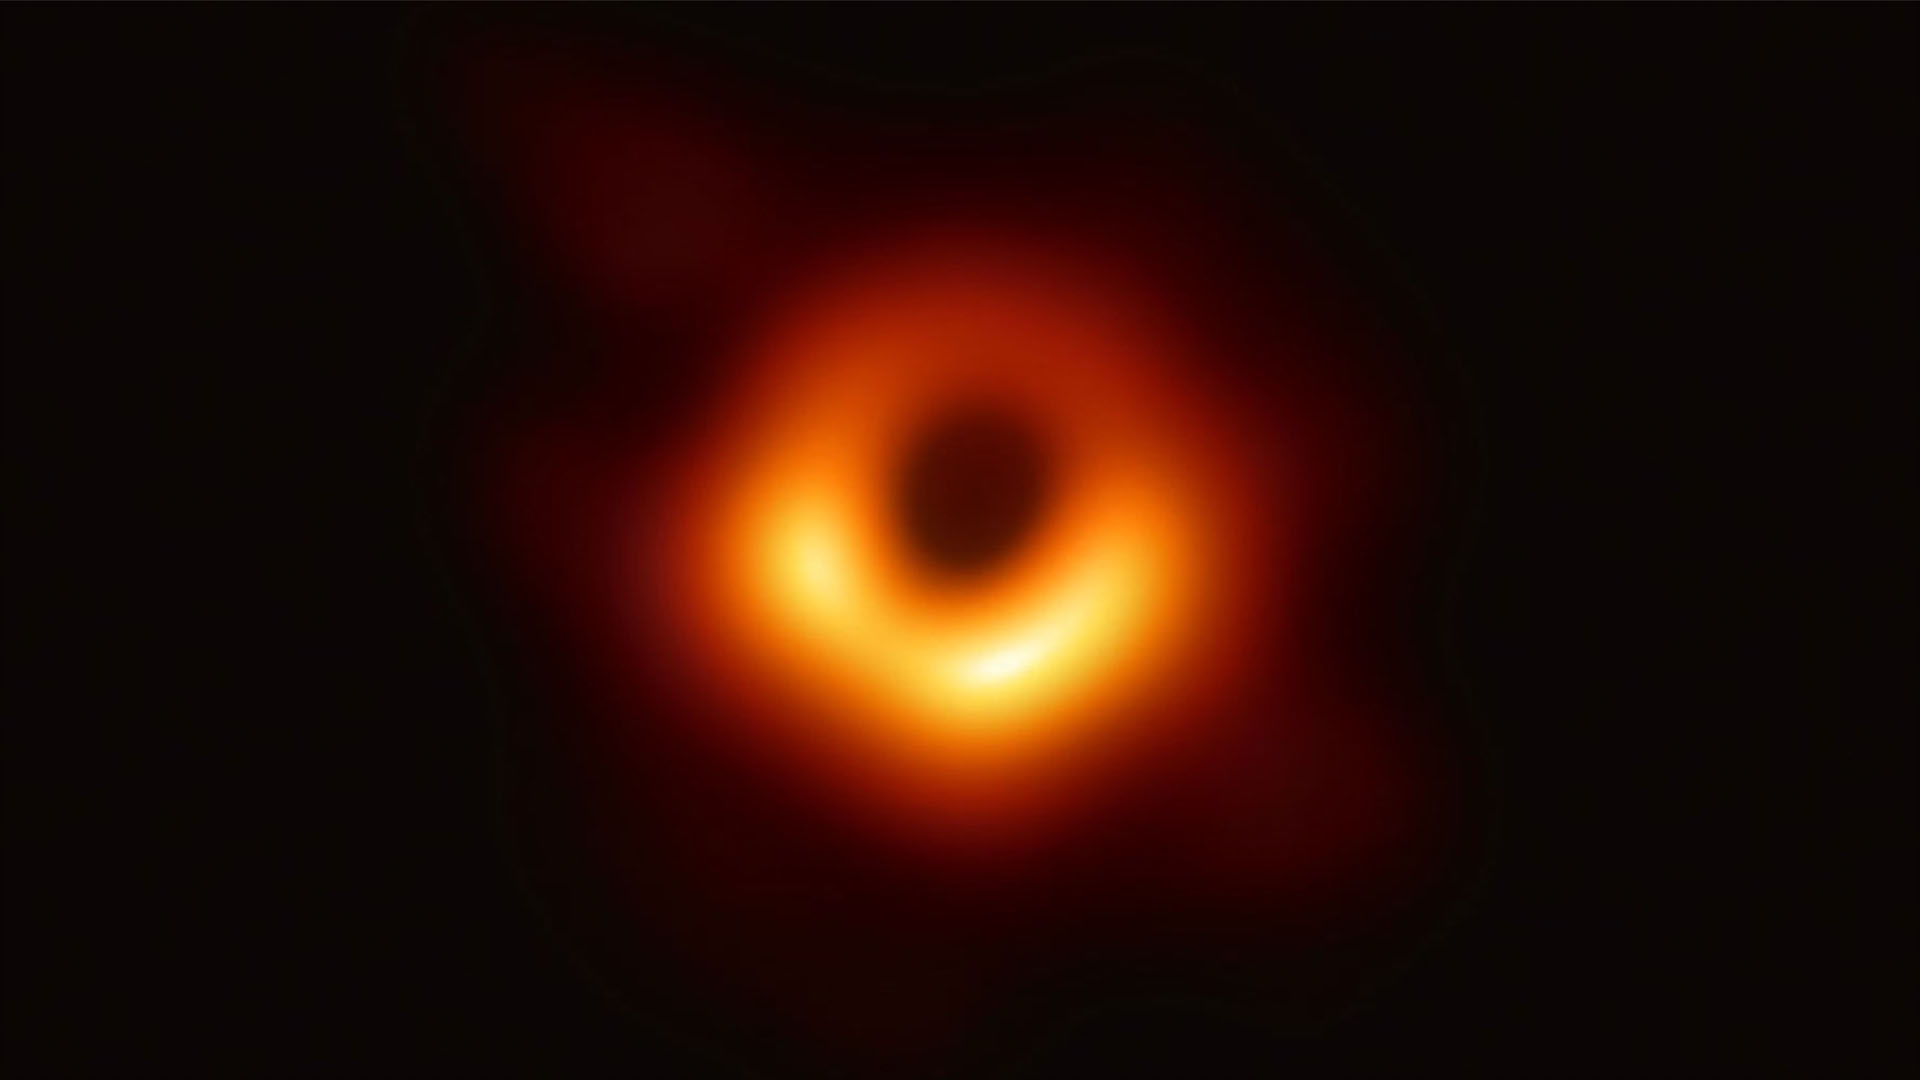 The Event Horizon Telescope captured this image of the supermassive black hole in the center of the galaxy M87 co0nfirming the picture of black holes painted by general relativity.